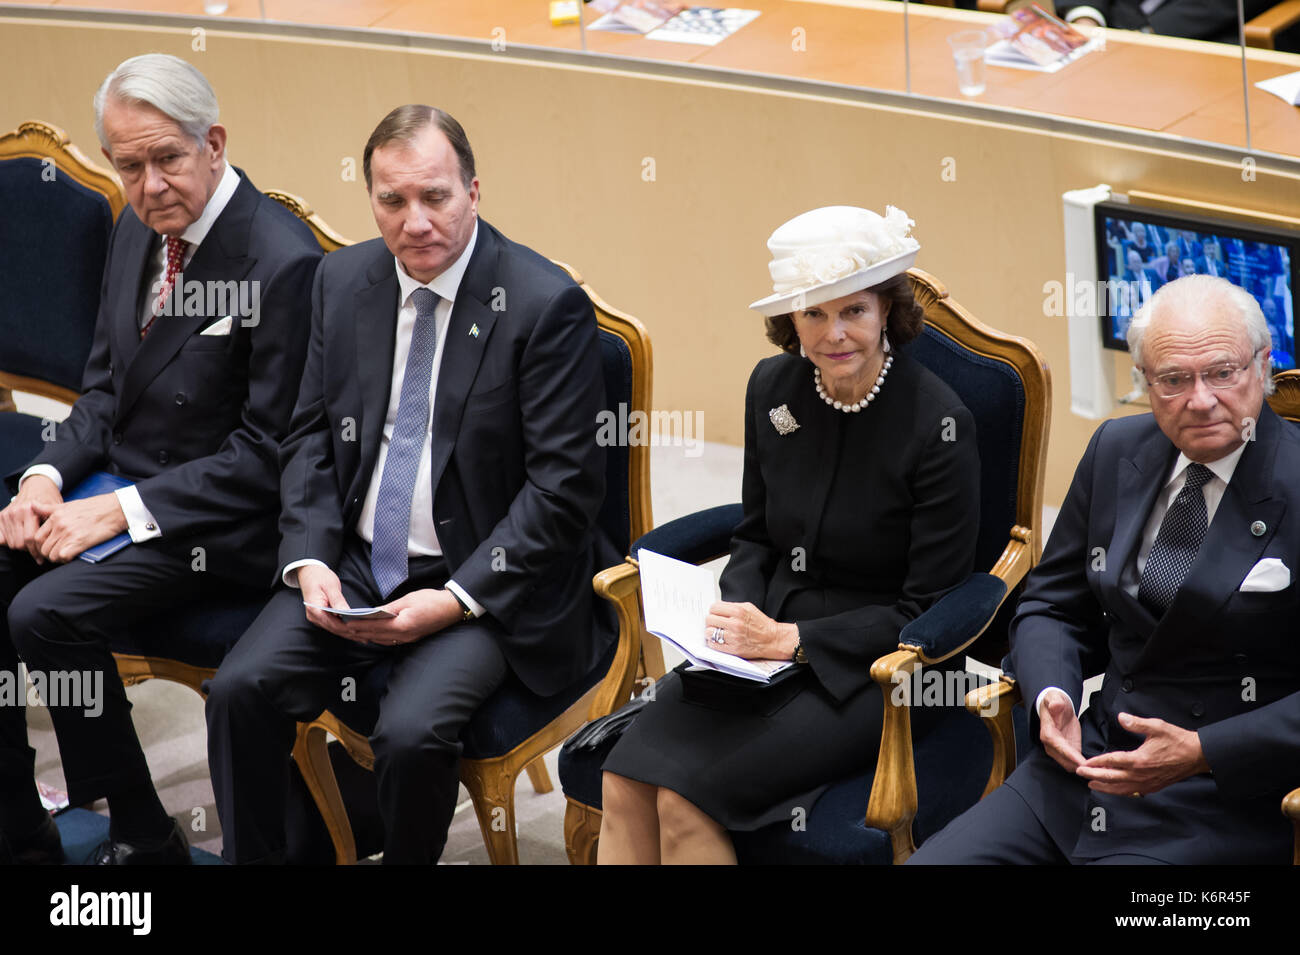 Stockholm, Sweden, 12th September, 2017. Opening of the Riksdag session.  Ceremony in the Chamber at the opening of the Riksdag session. PM Stefan Lofven, Queen Silvia, King Carl XVI Gustaf. /Credit:Barbro Bergfeldt/Alamy Live News Stock Photo